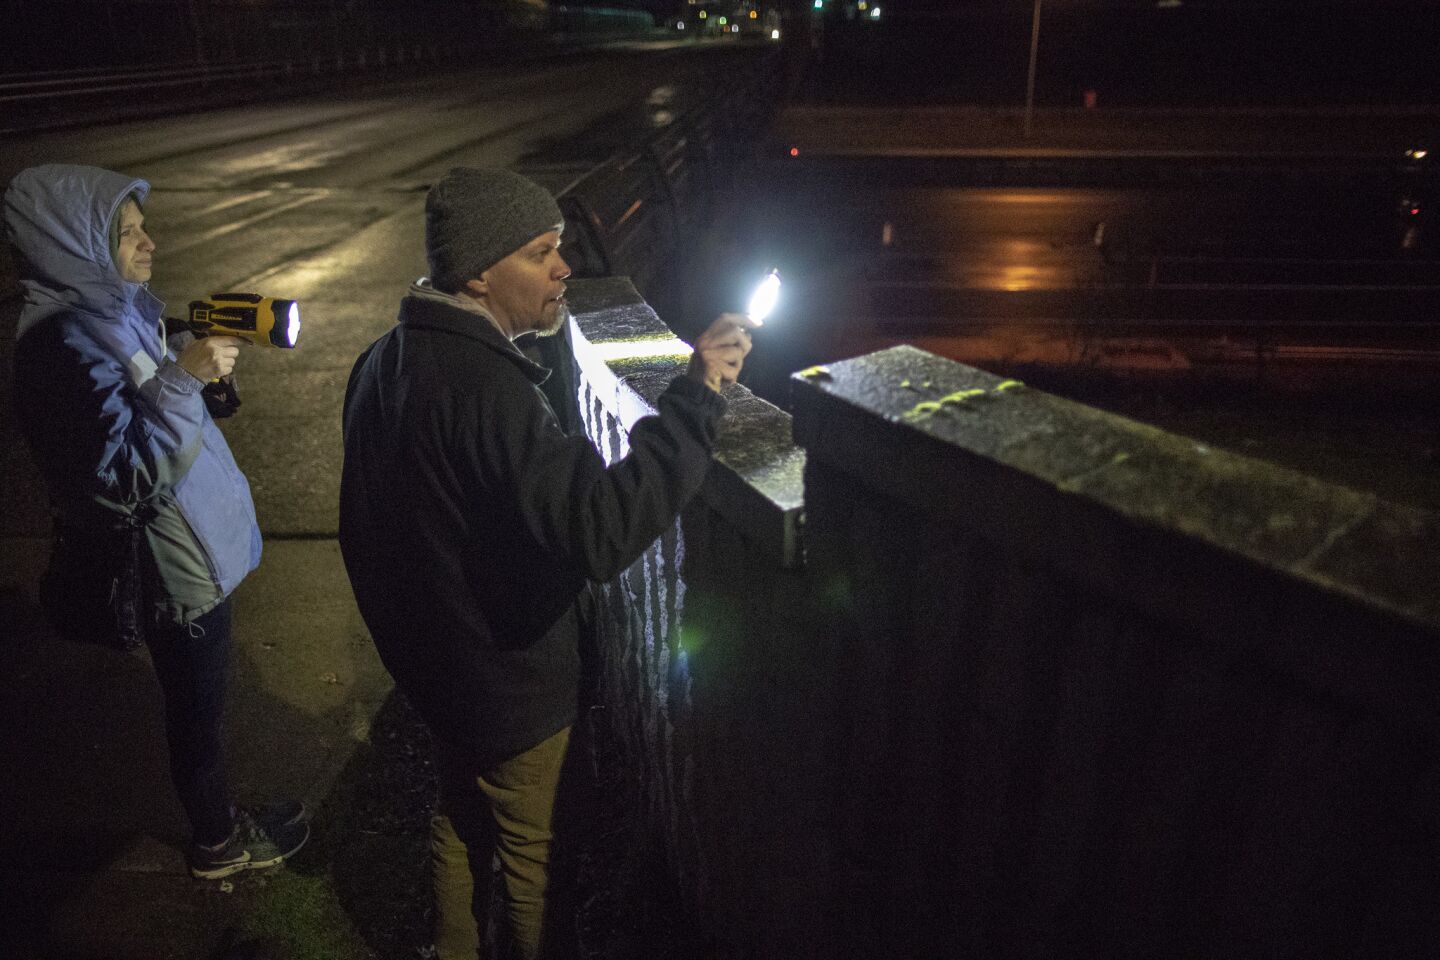 Members of the Montavilla Initiative citizens group Evelyn Macpherson, left, and Jeff Church shine flashlights toward a pair of tents pitched on an embankment alongside Interstate 205 while on patrol in their neighborhood in Portland, Ore.